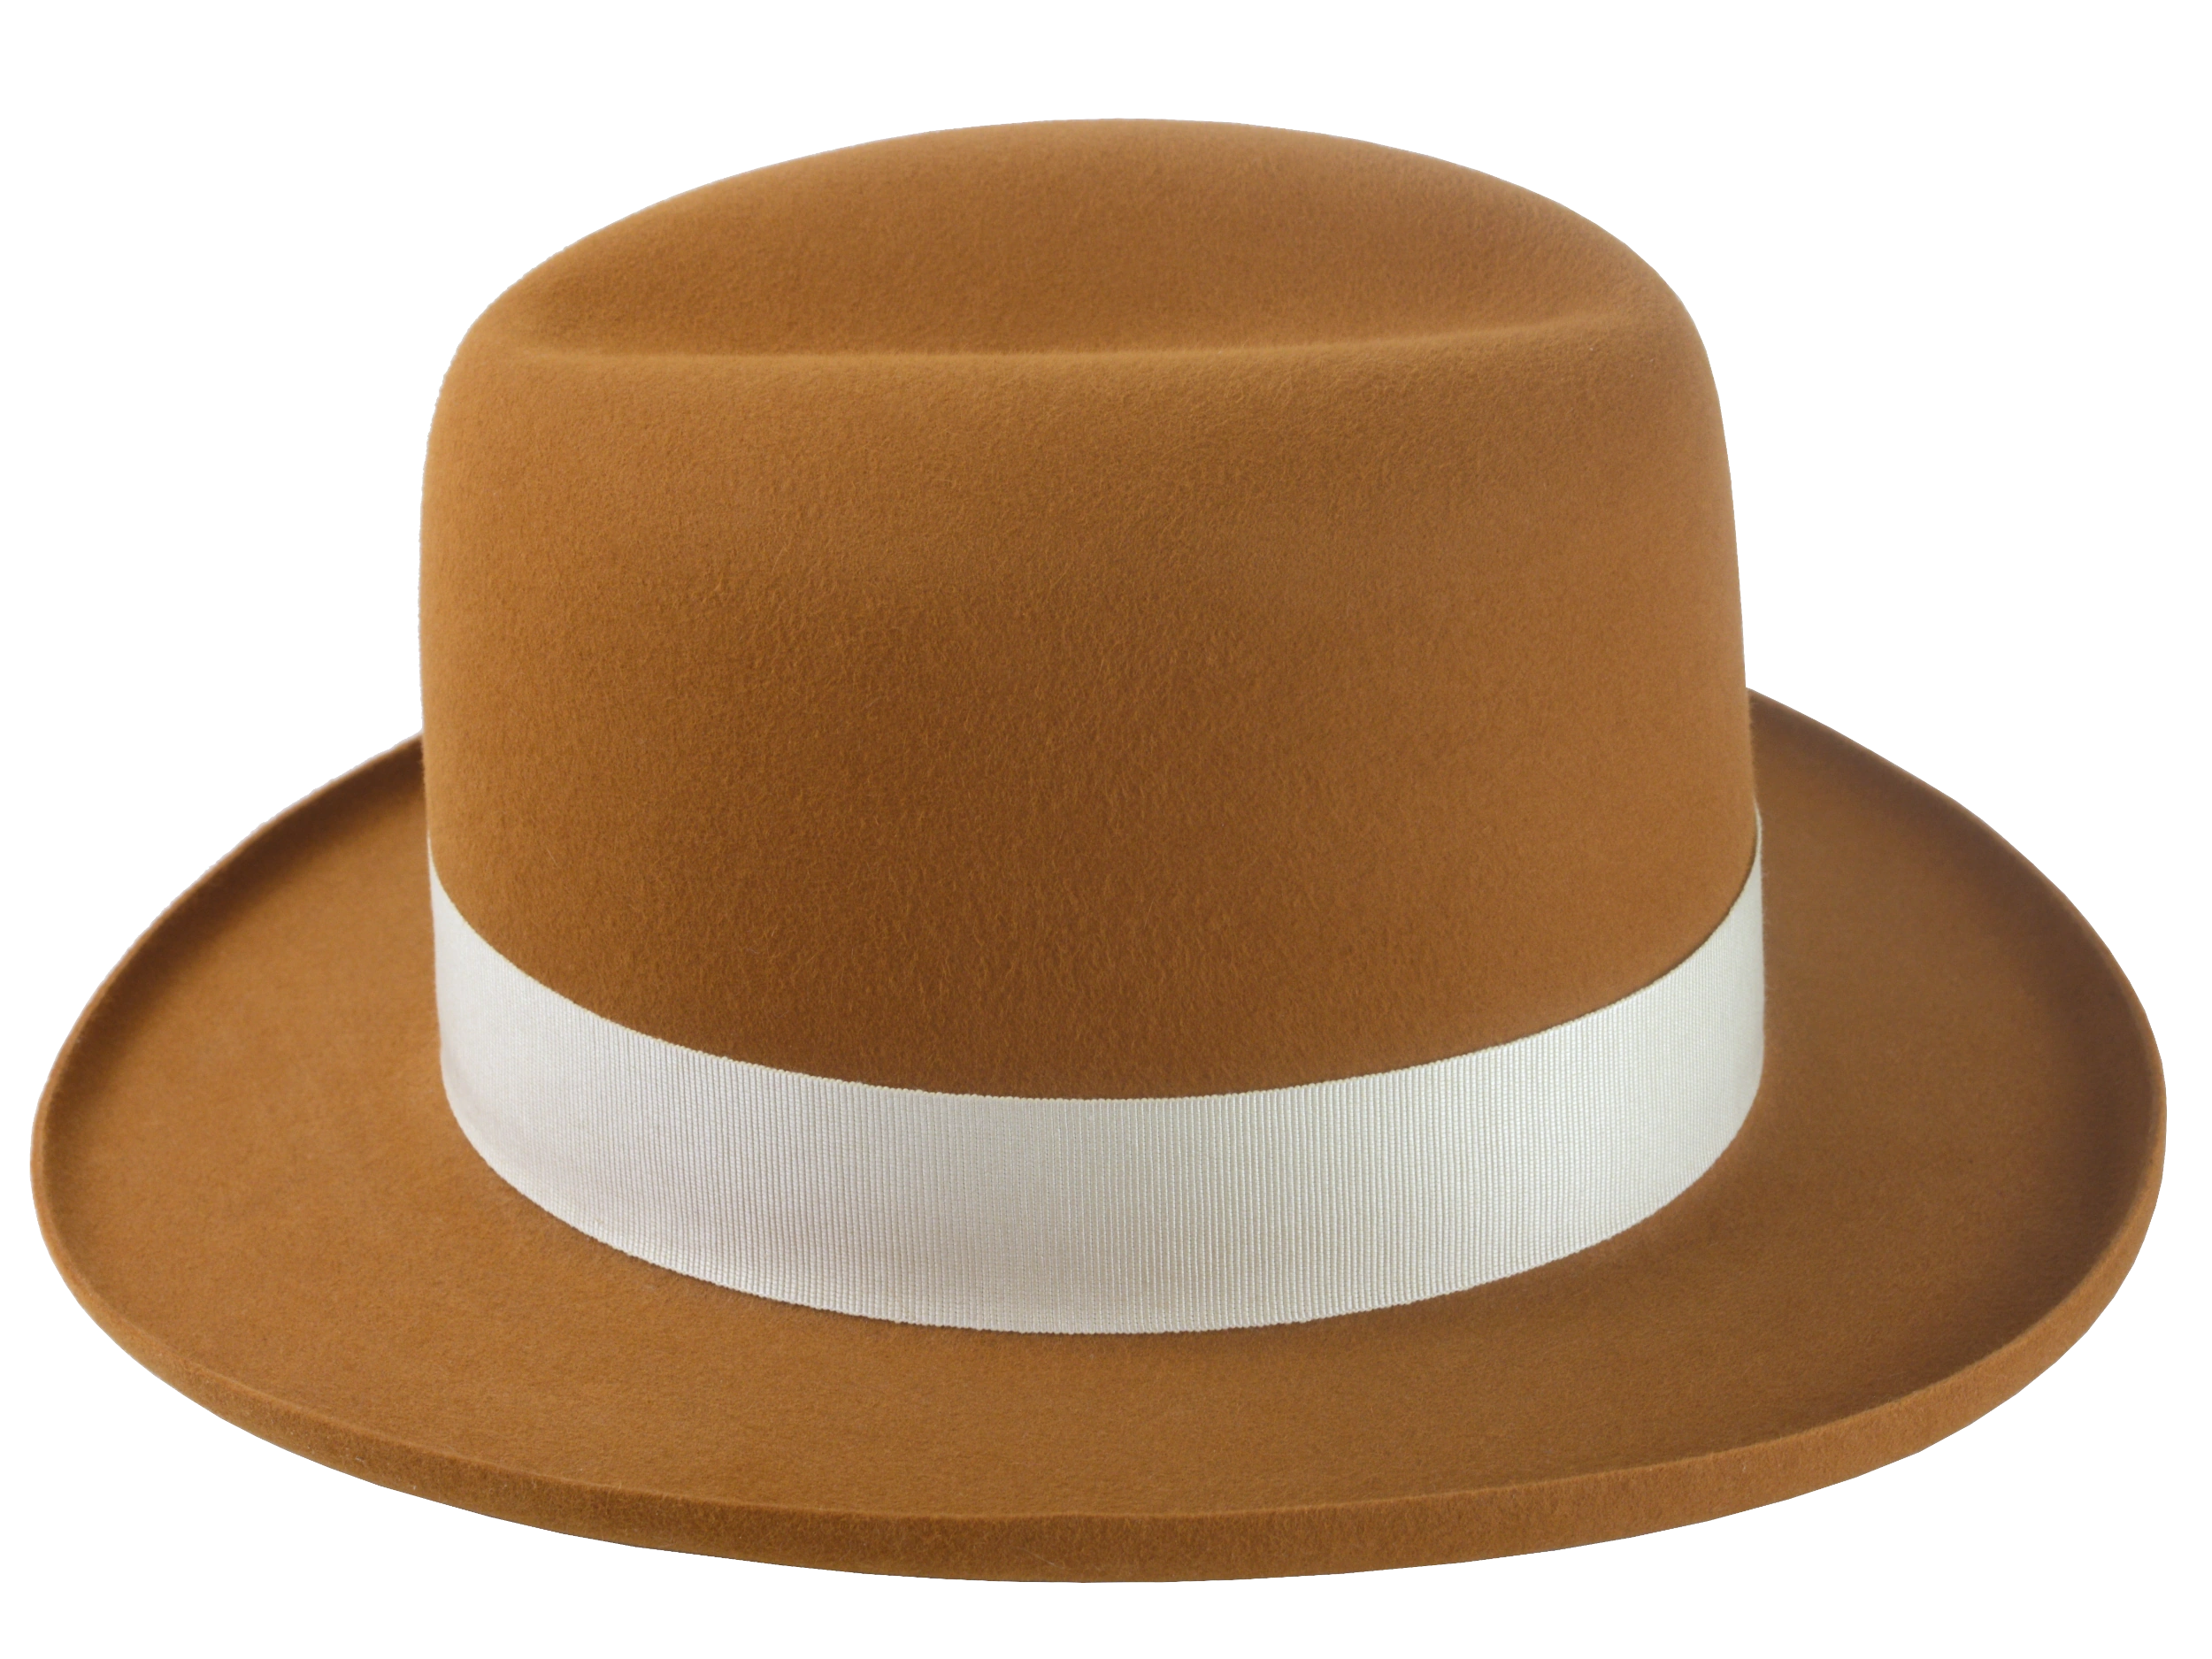 Angle view of the Derringer homburg fedora showcasing the unique single-crease crown and raw-edge rolled brim